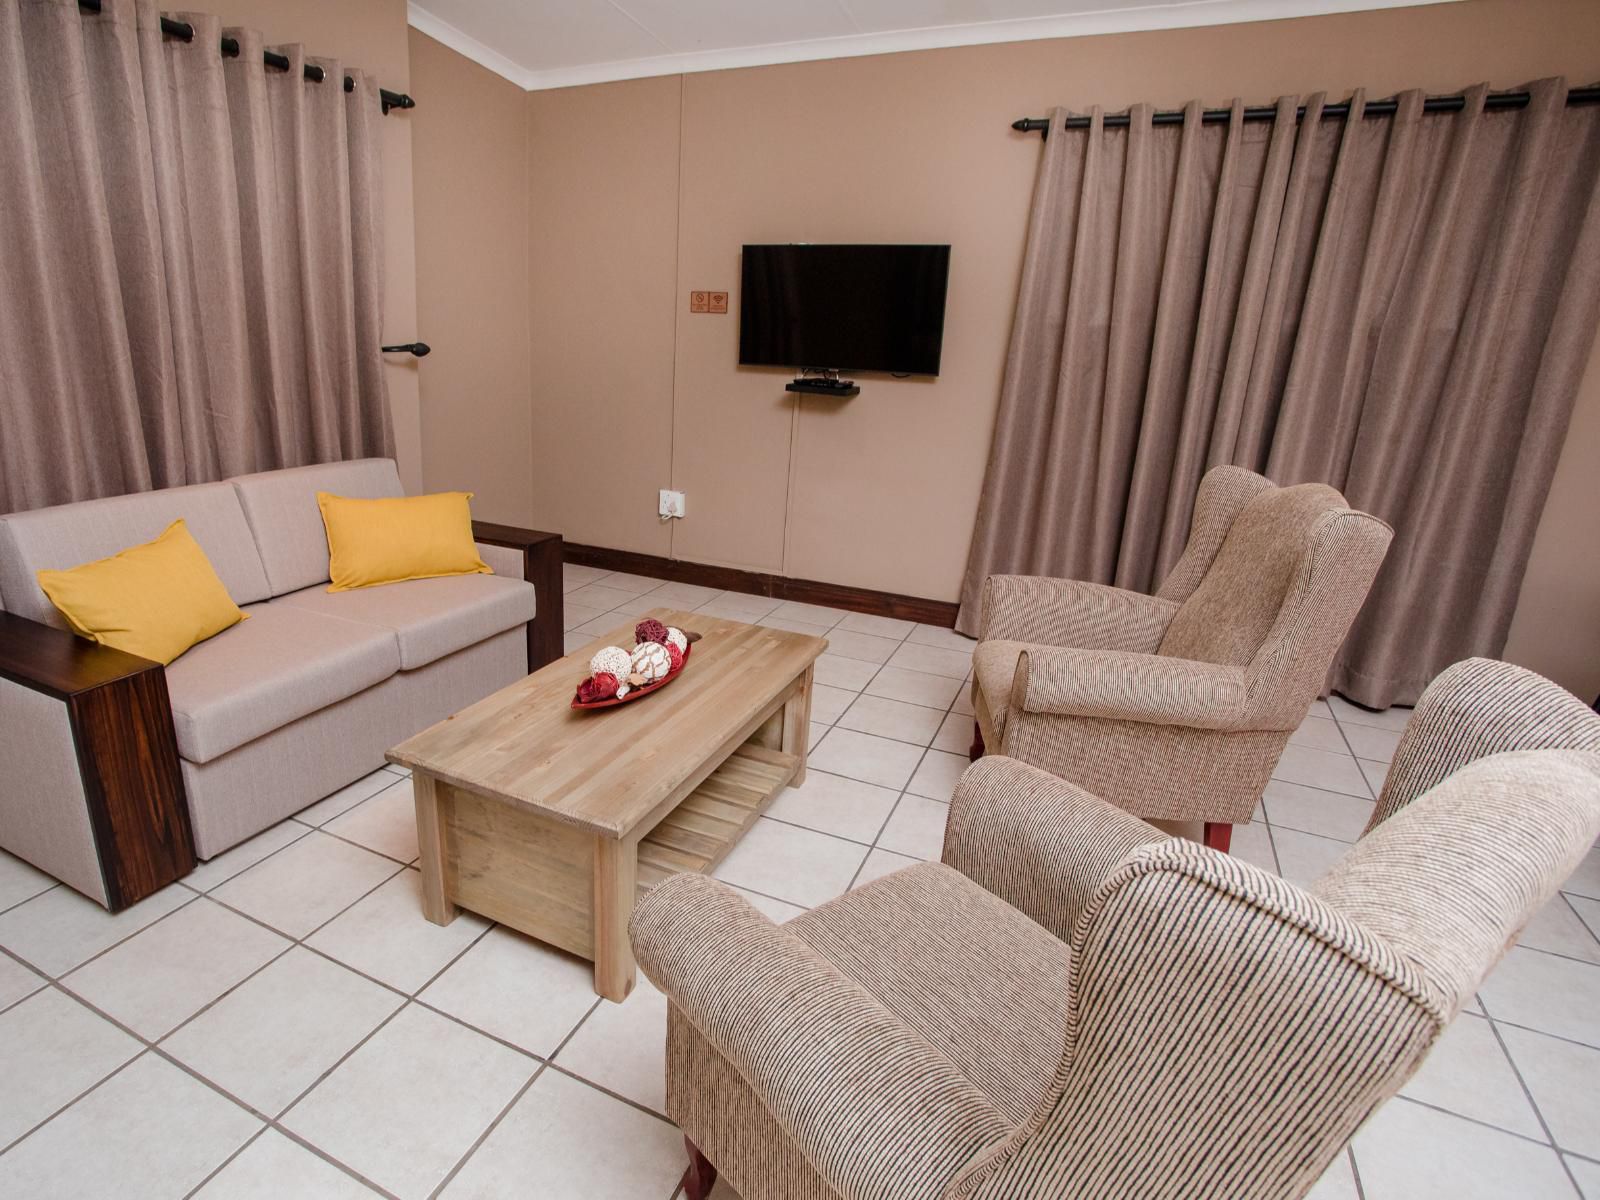 4 Gazelle Guesthouse The Rest 454 Jt Nelspruit Mpumalanga South Africa Living Room